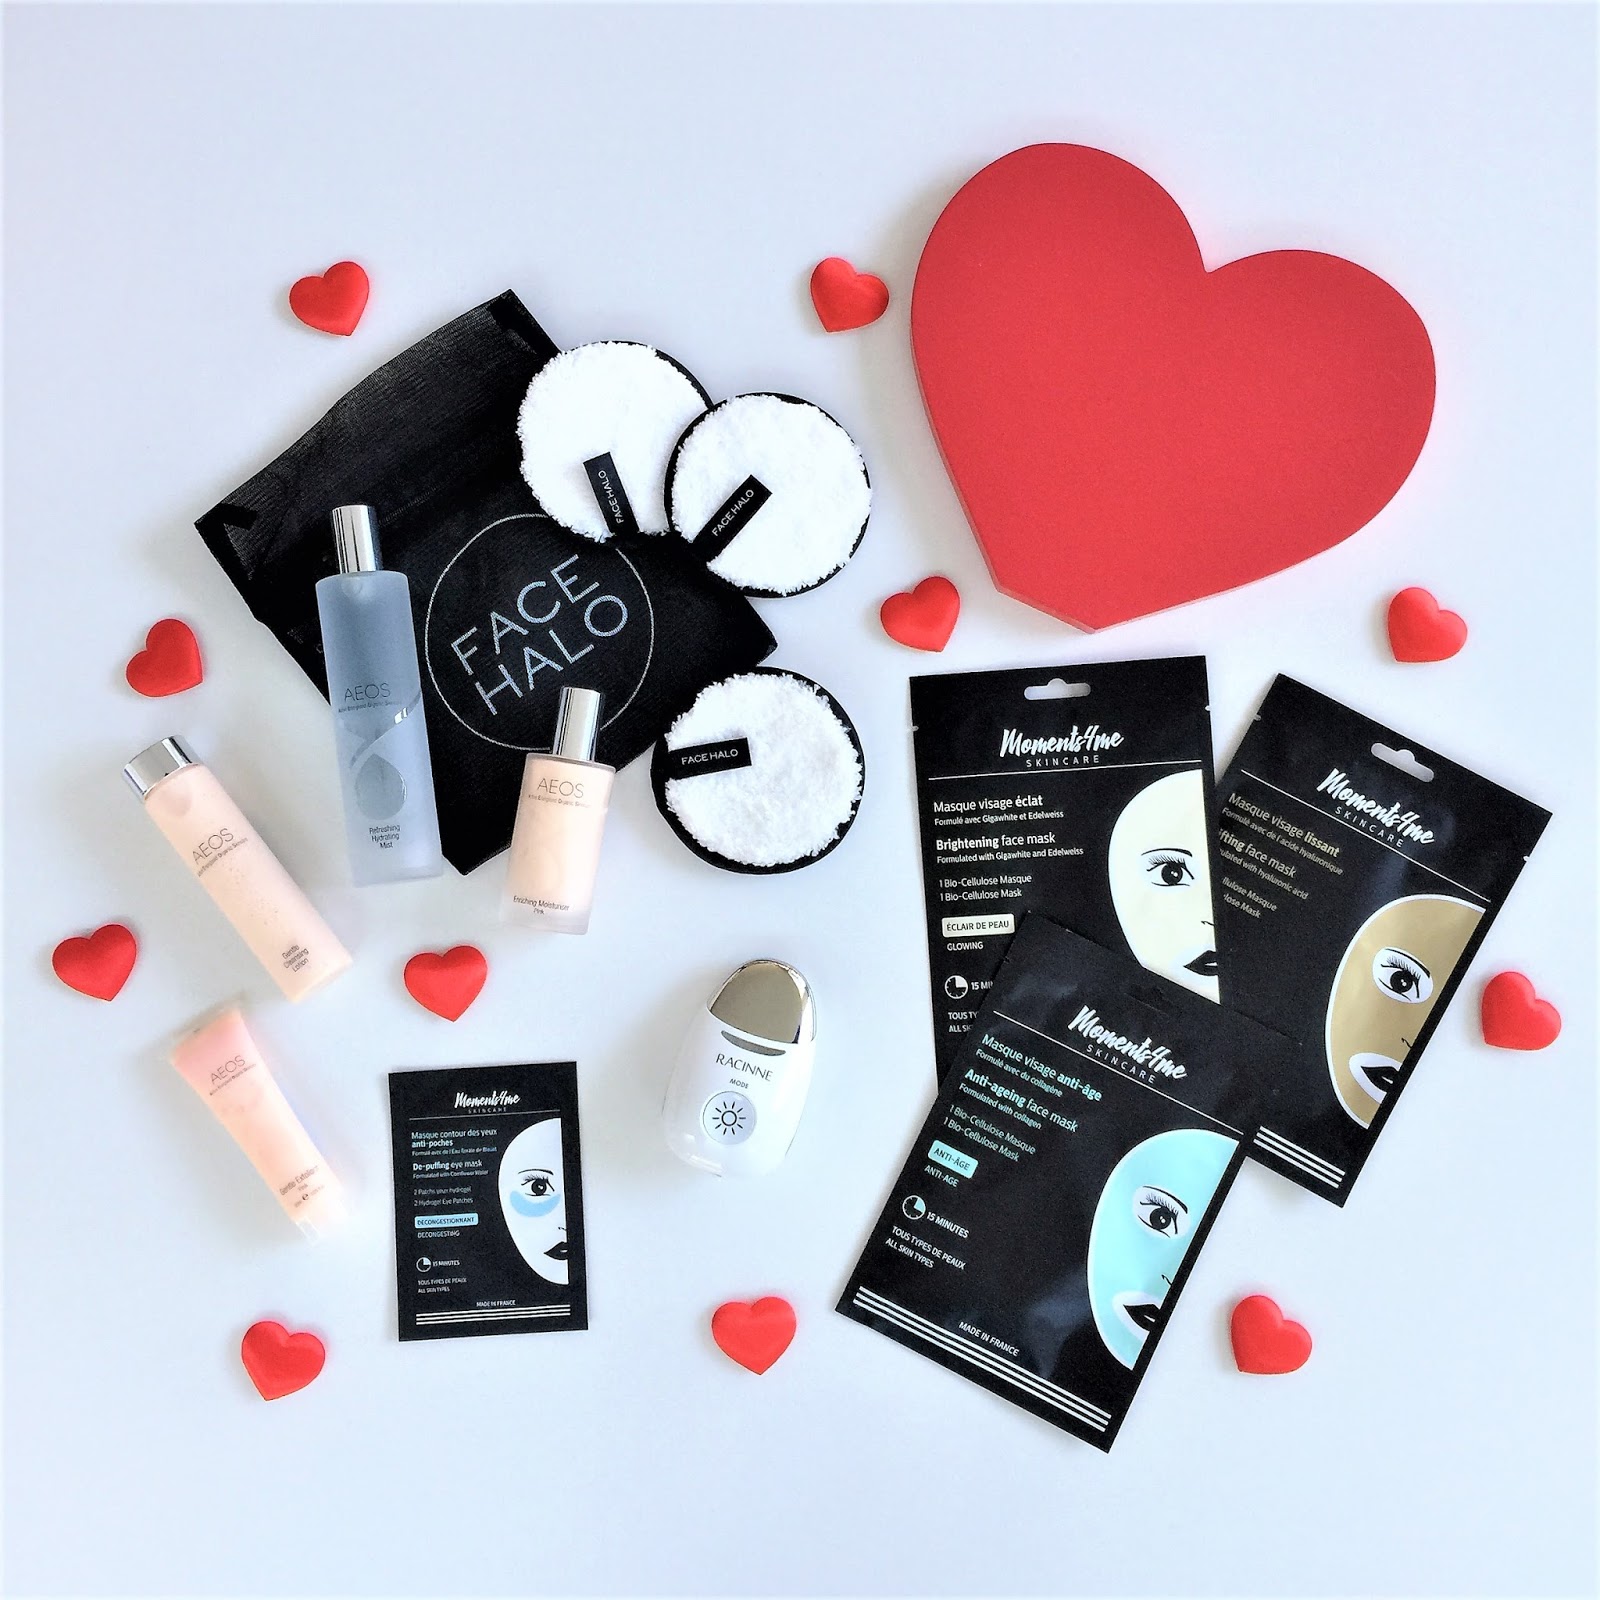 Valentines Day Skincare From Aeos Face Halo Moments4me And